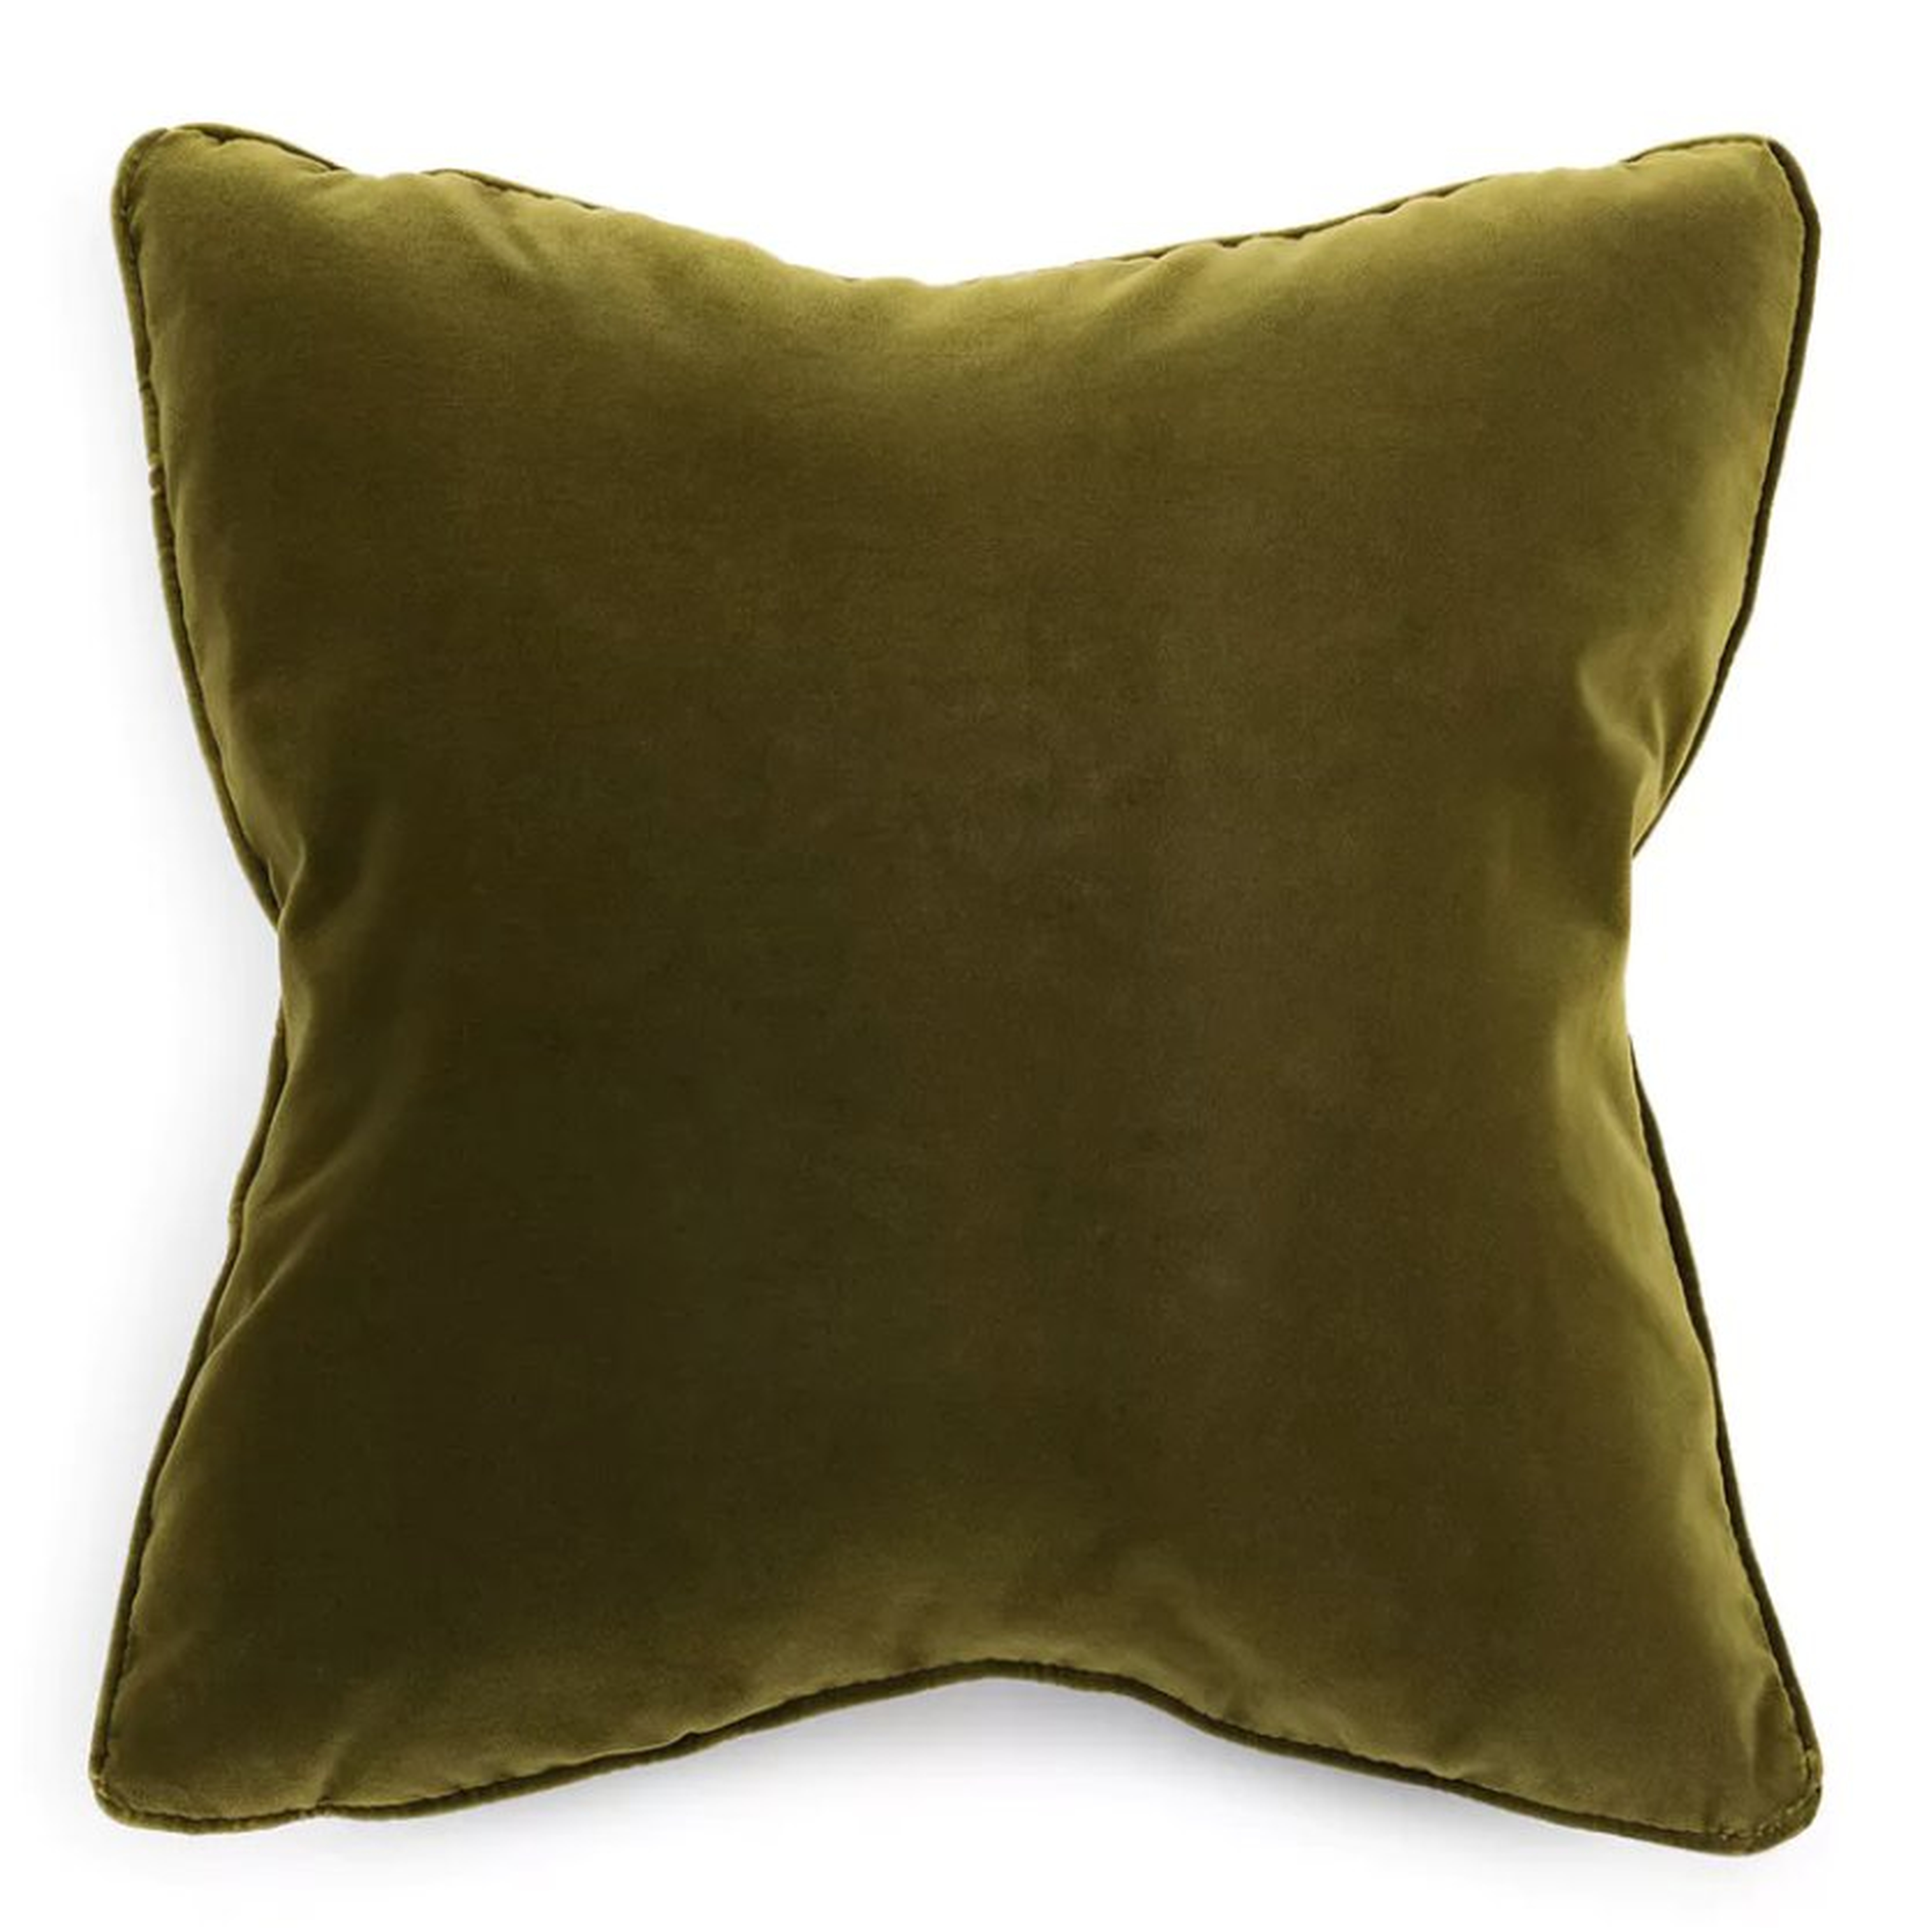 Lucca Olive Green Pillow Set of 2 - Article